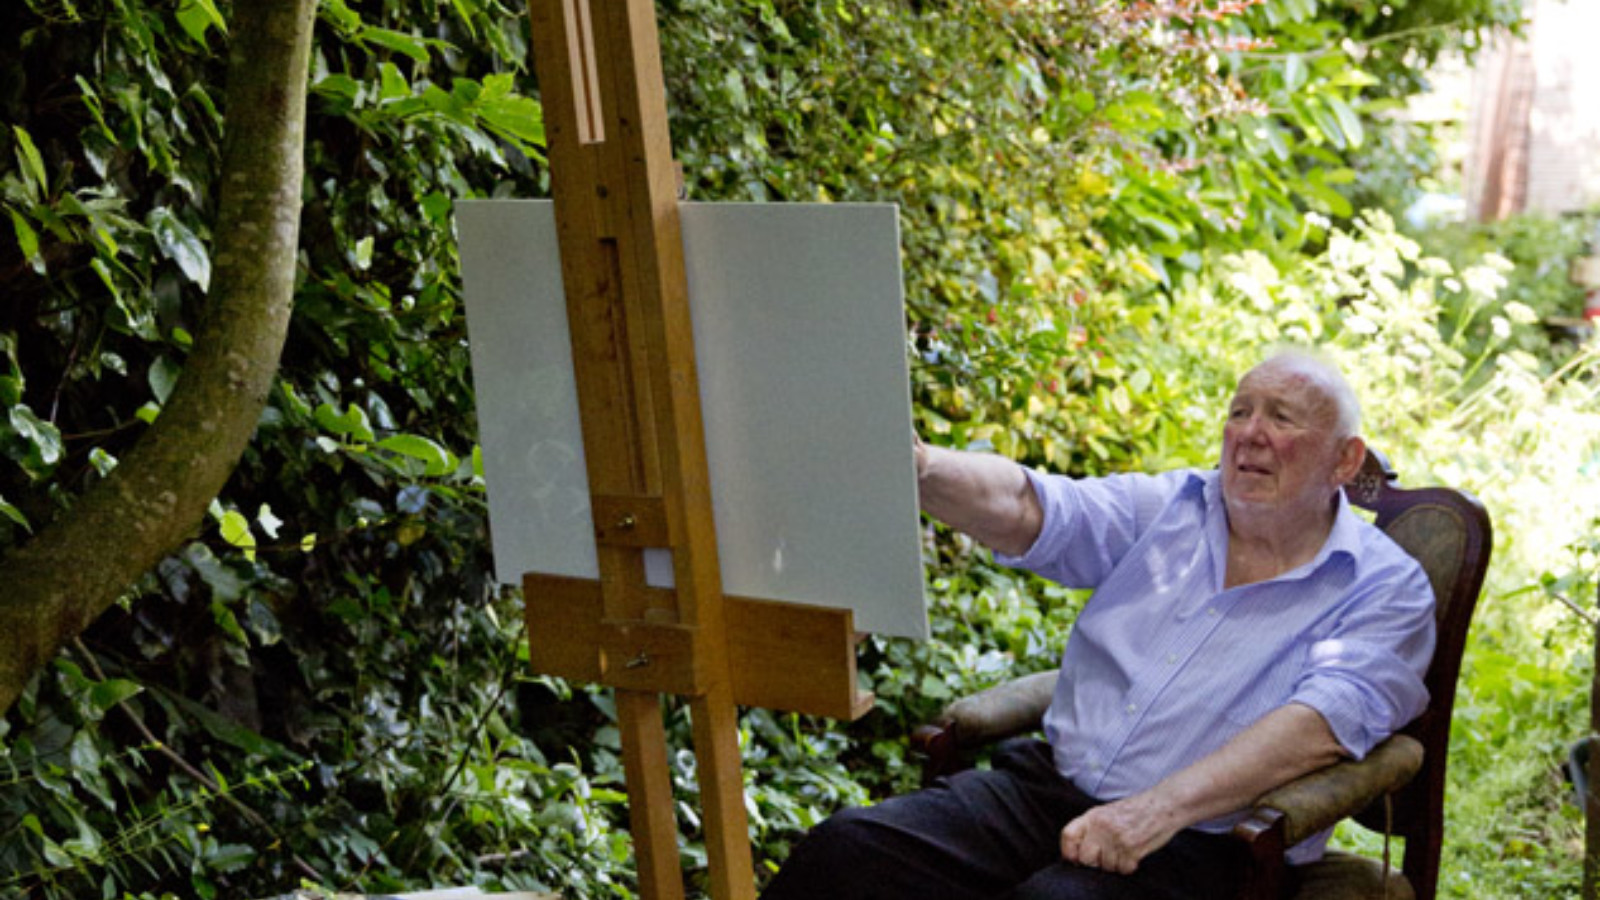 An artist sits in a chair in front of an easel and surrounded by arts materials. They are sitting outside, in daylight in a tunnel of trees.